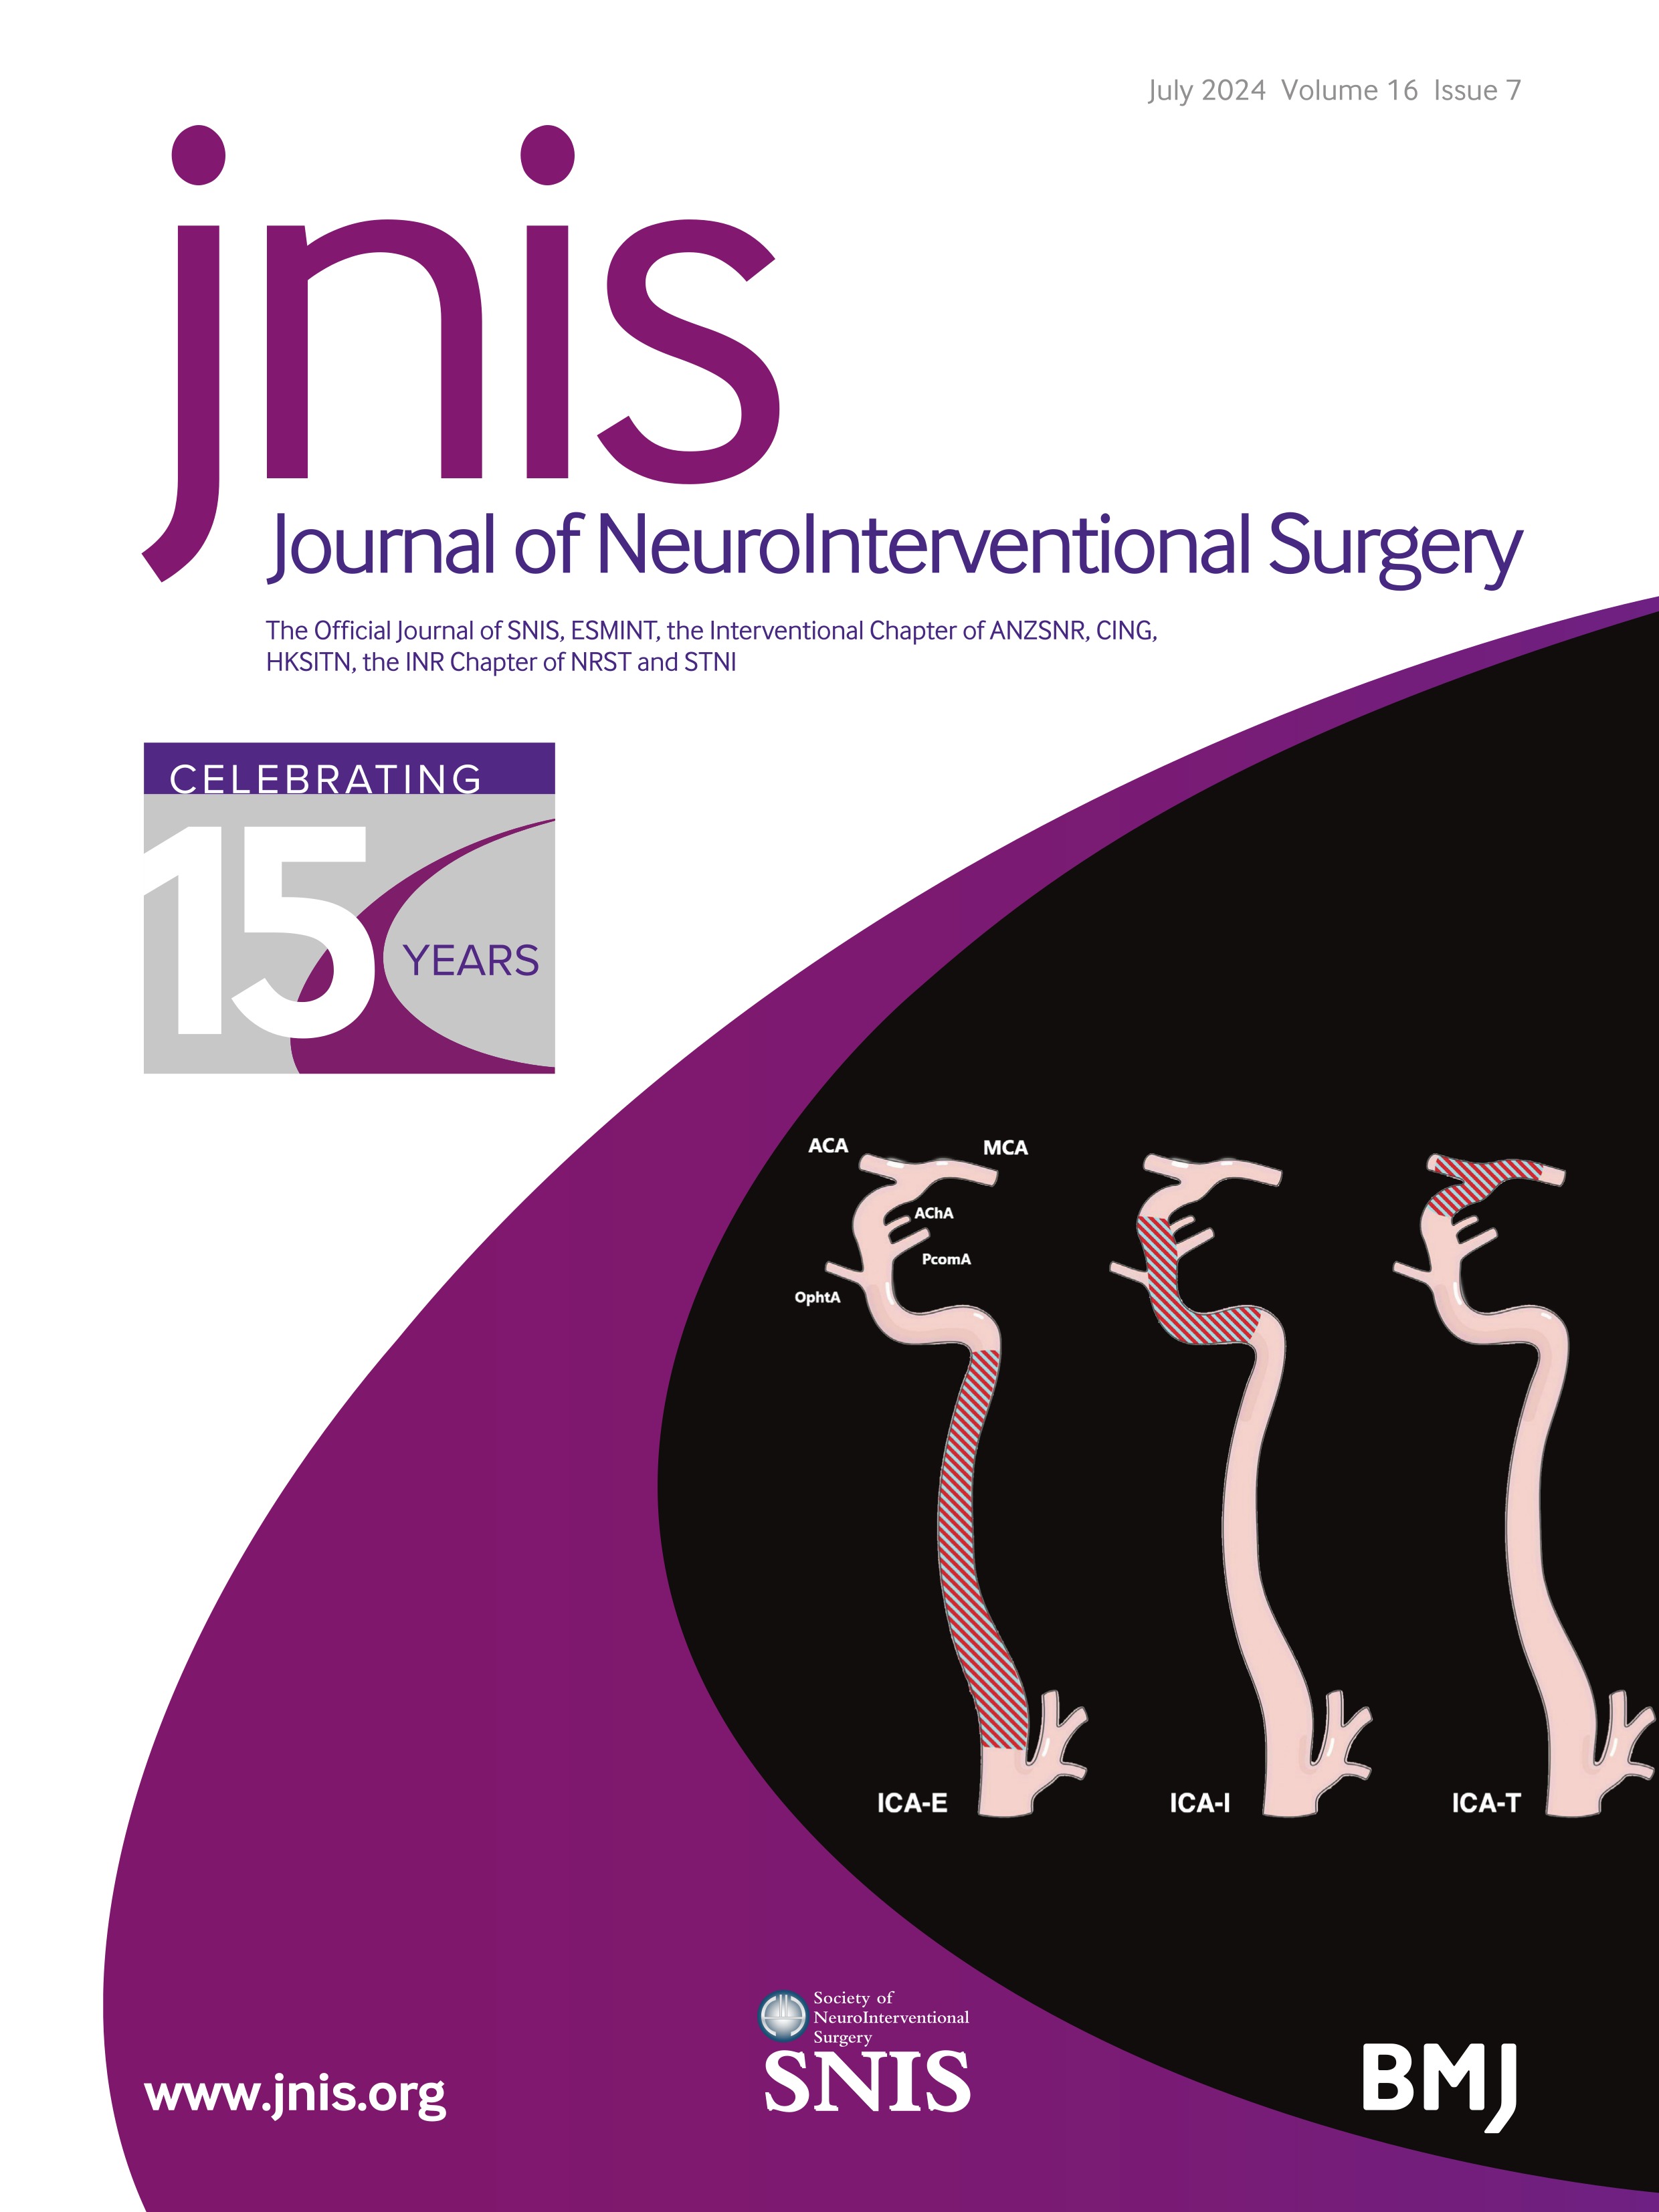 Active drug-coated flow diverter in a preclinical model of intracranial stenting